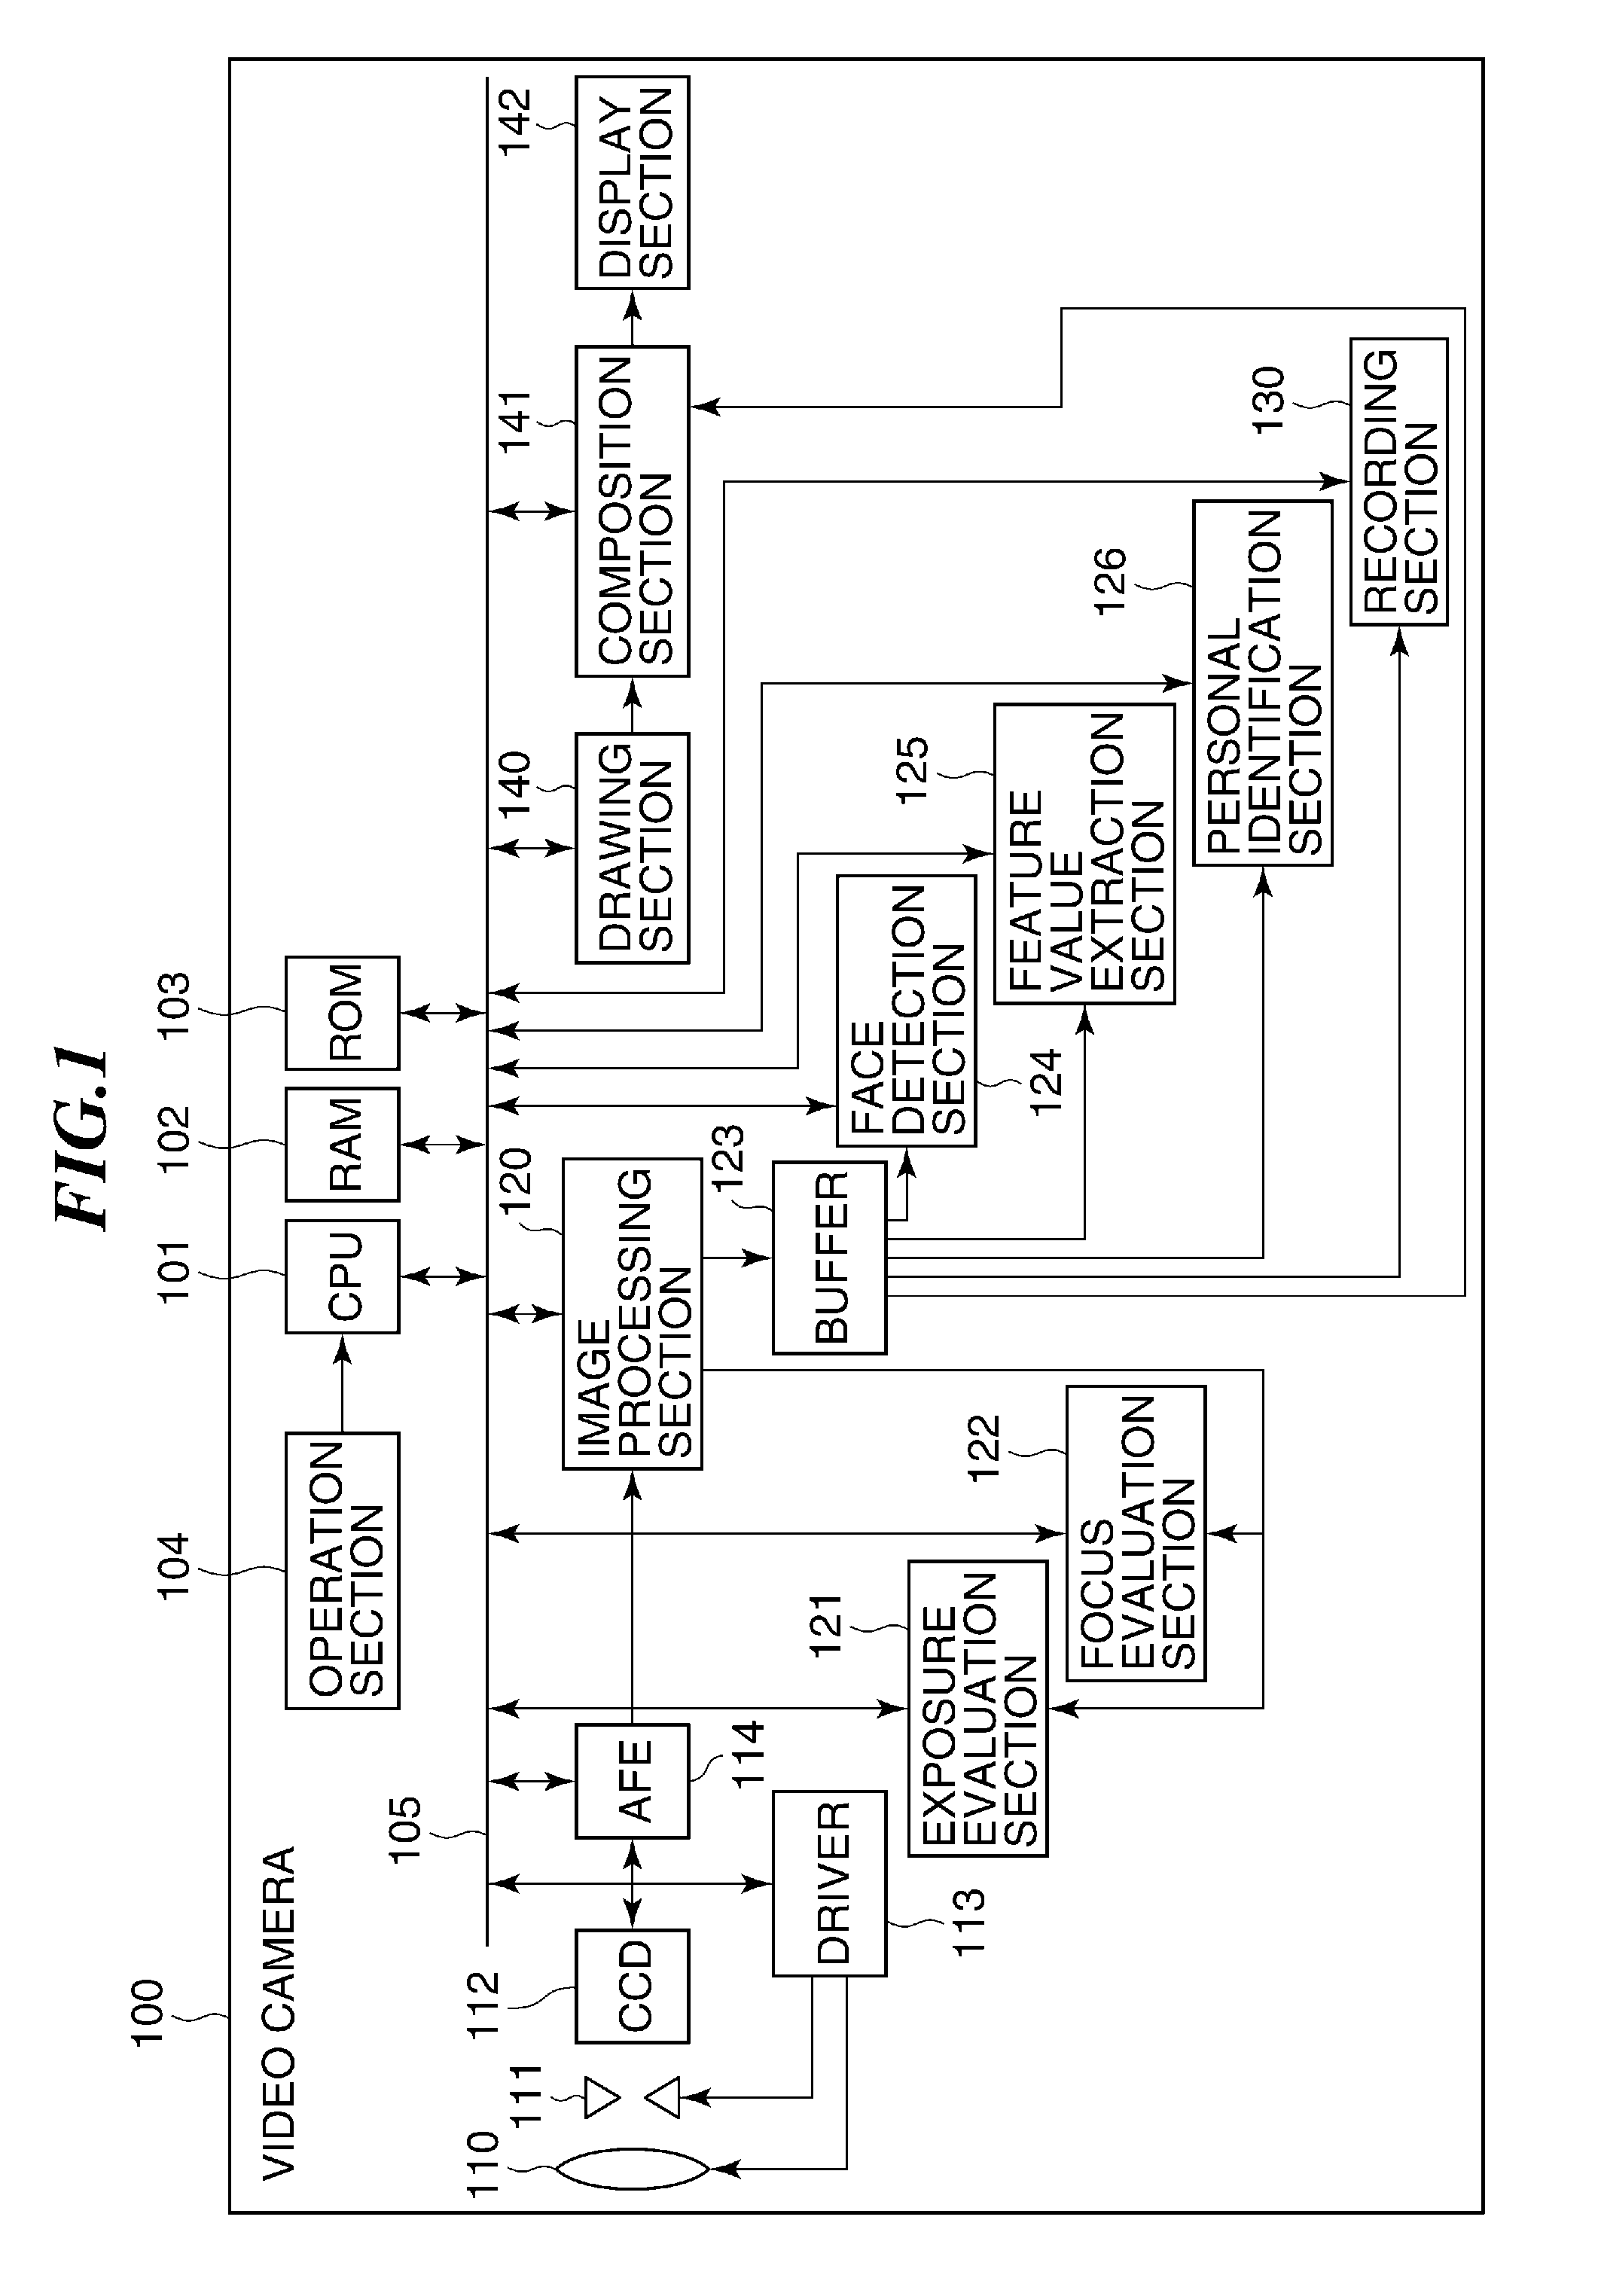 Image processing apparatus and control method therefor, as well as storage medium